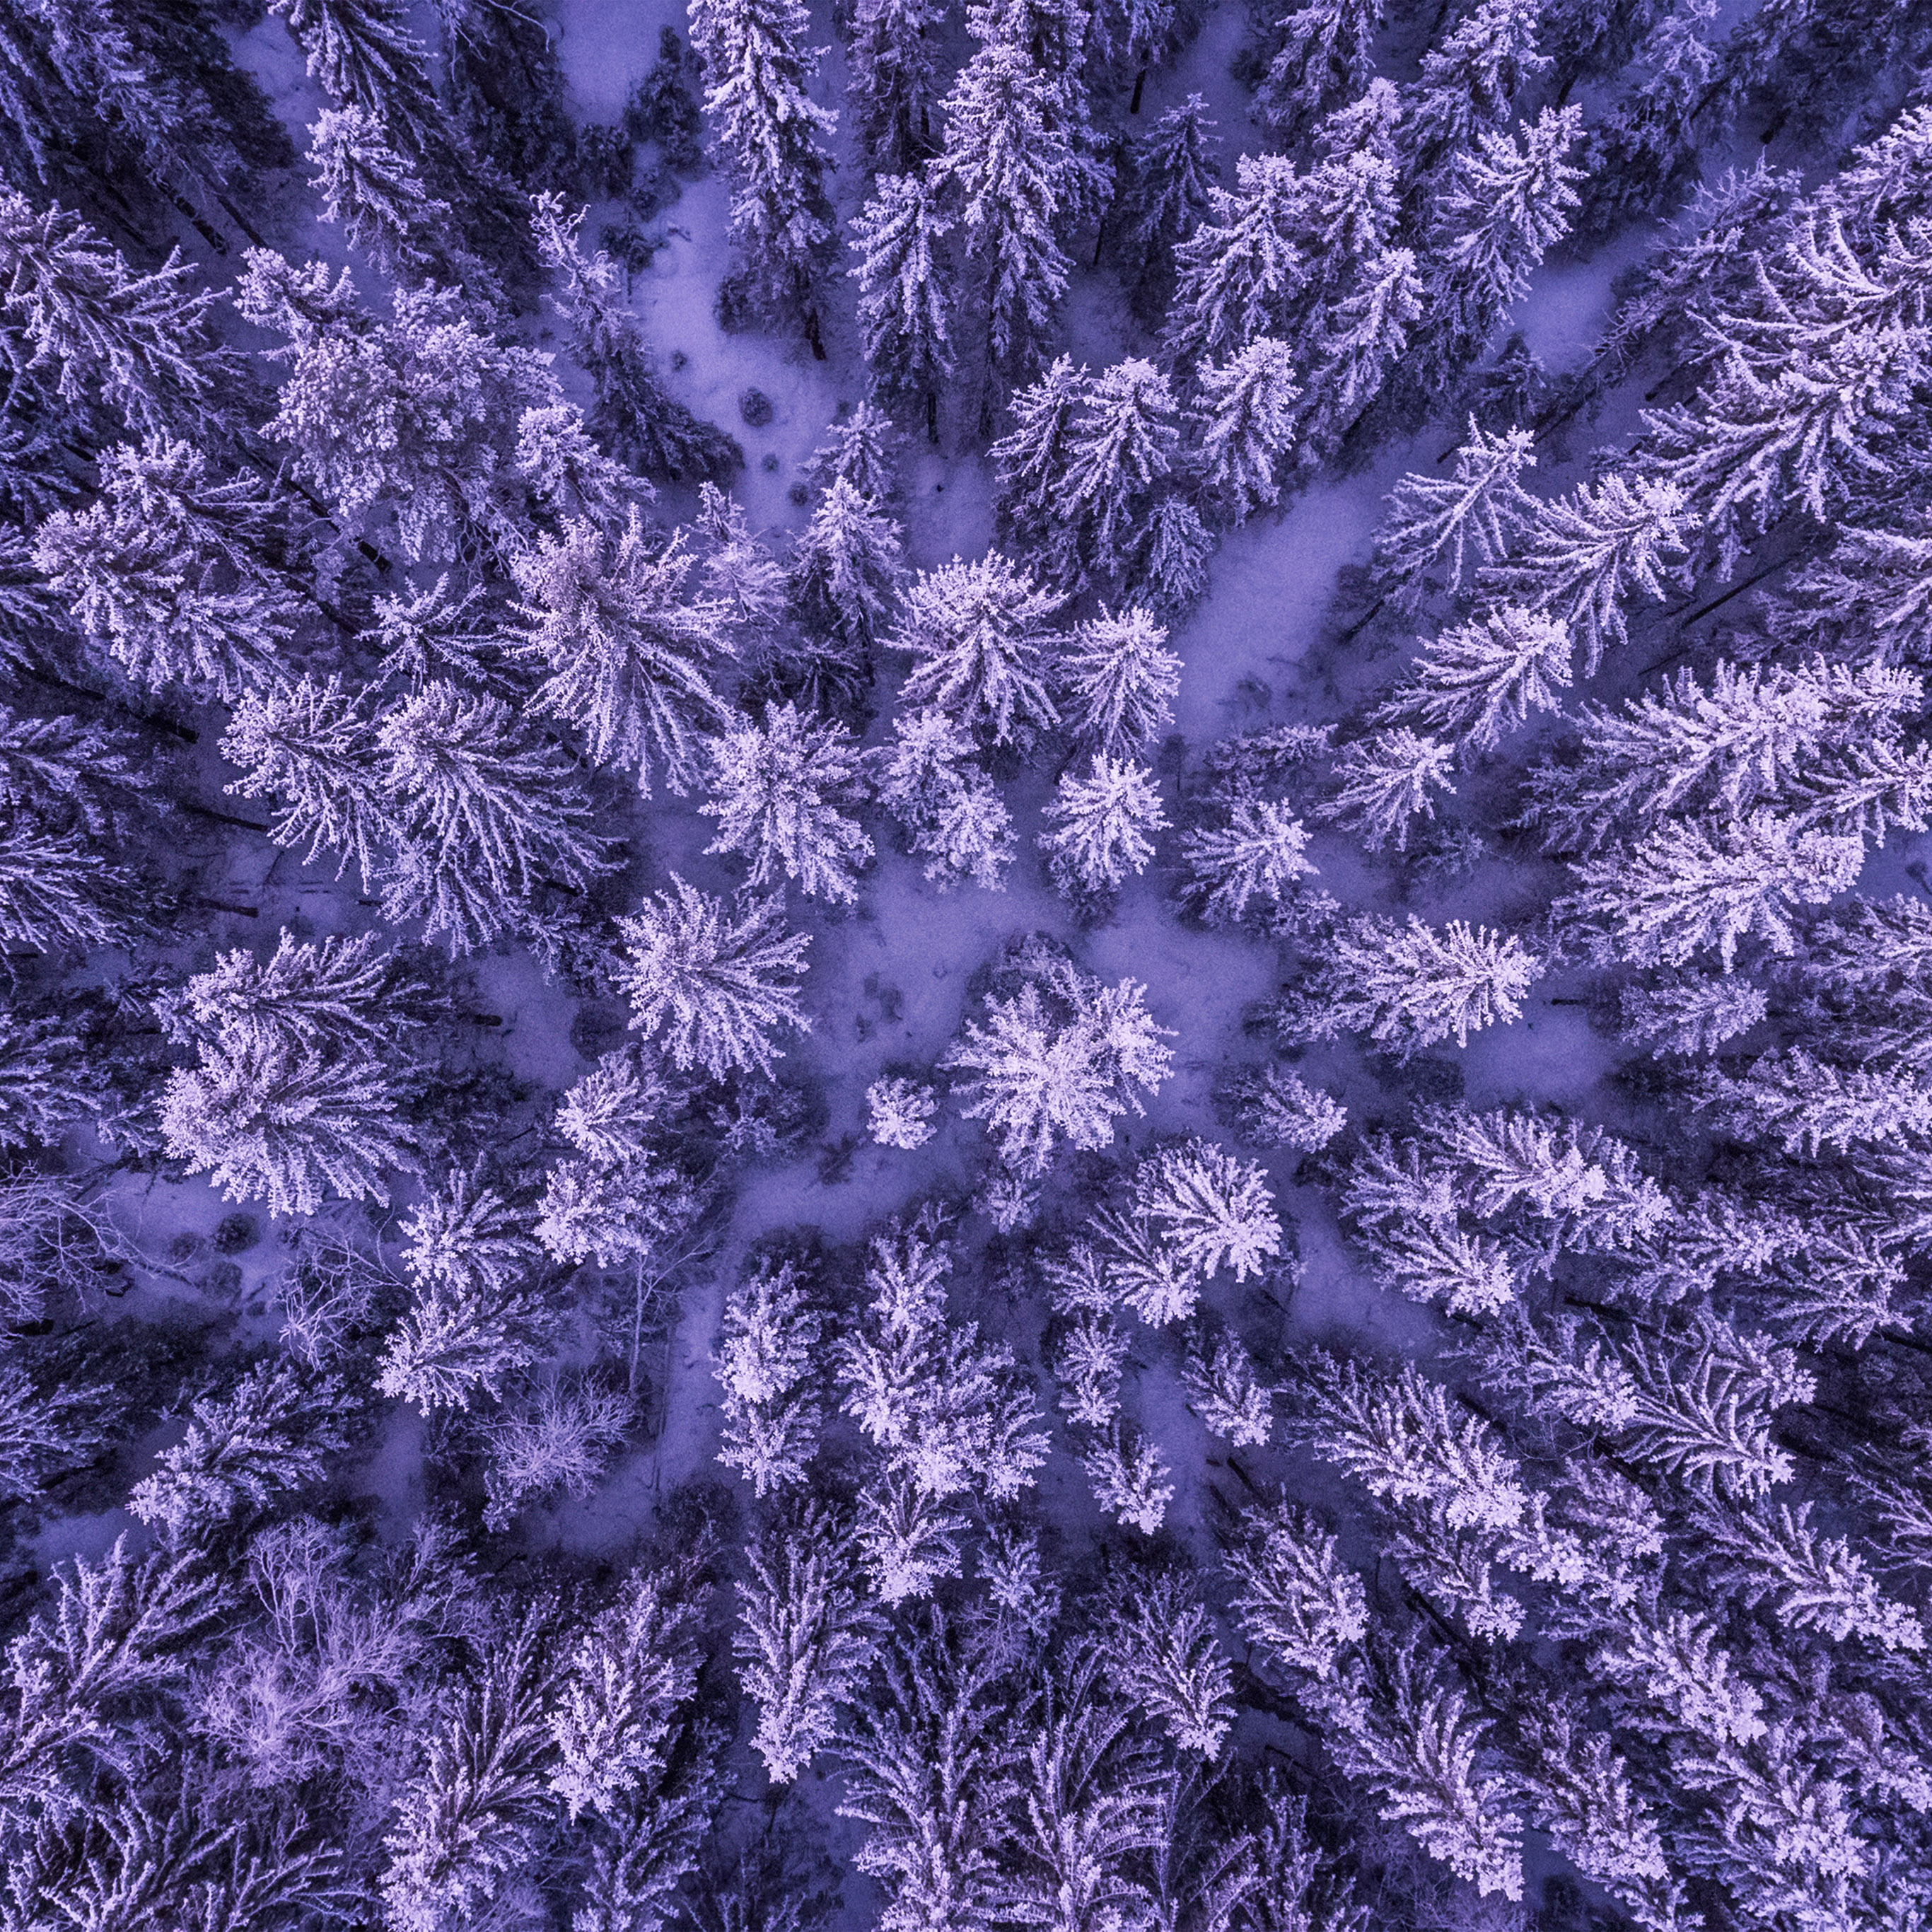 Ipad Pro - Trees Forest From Above , HD Wallpaper & Backgrounds